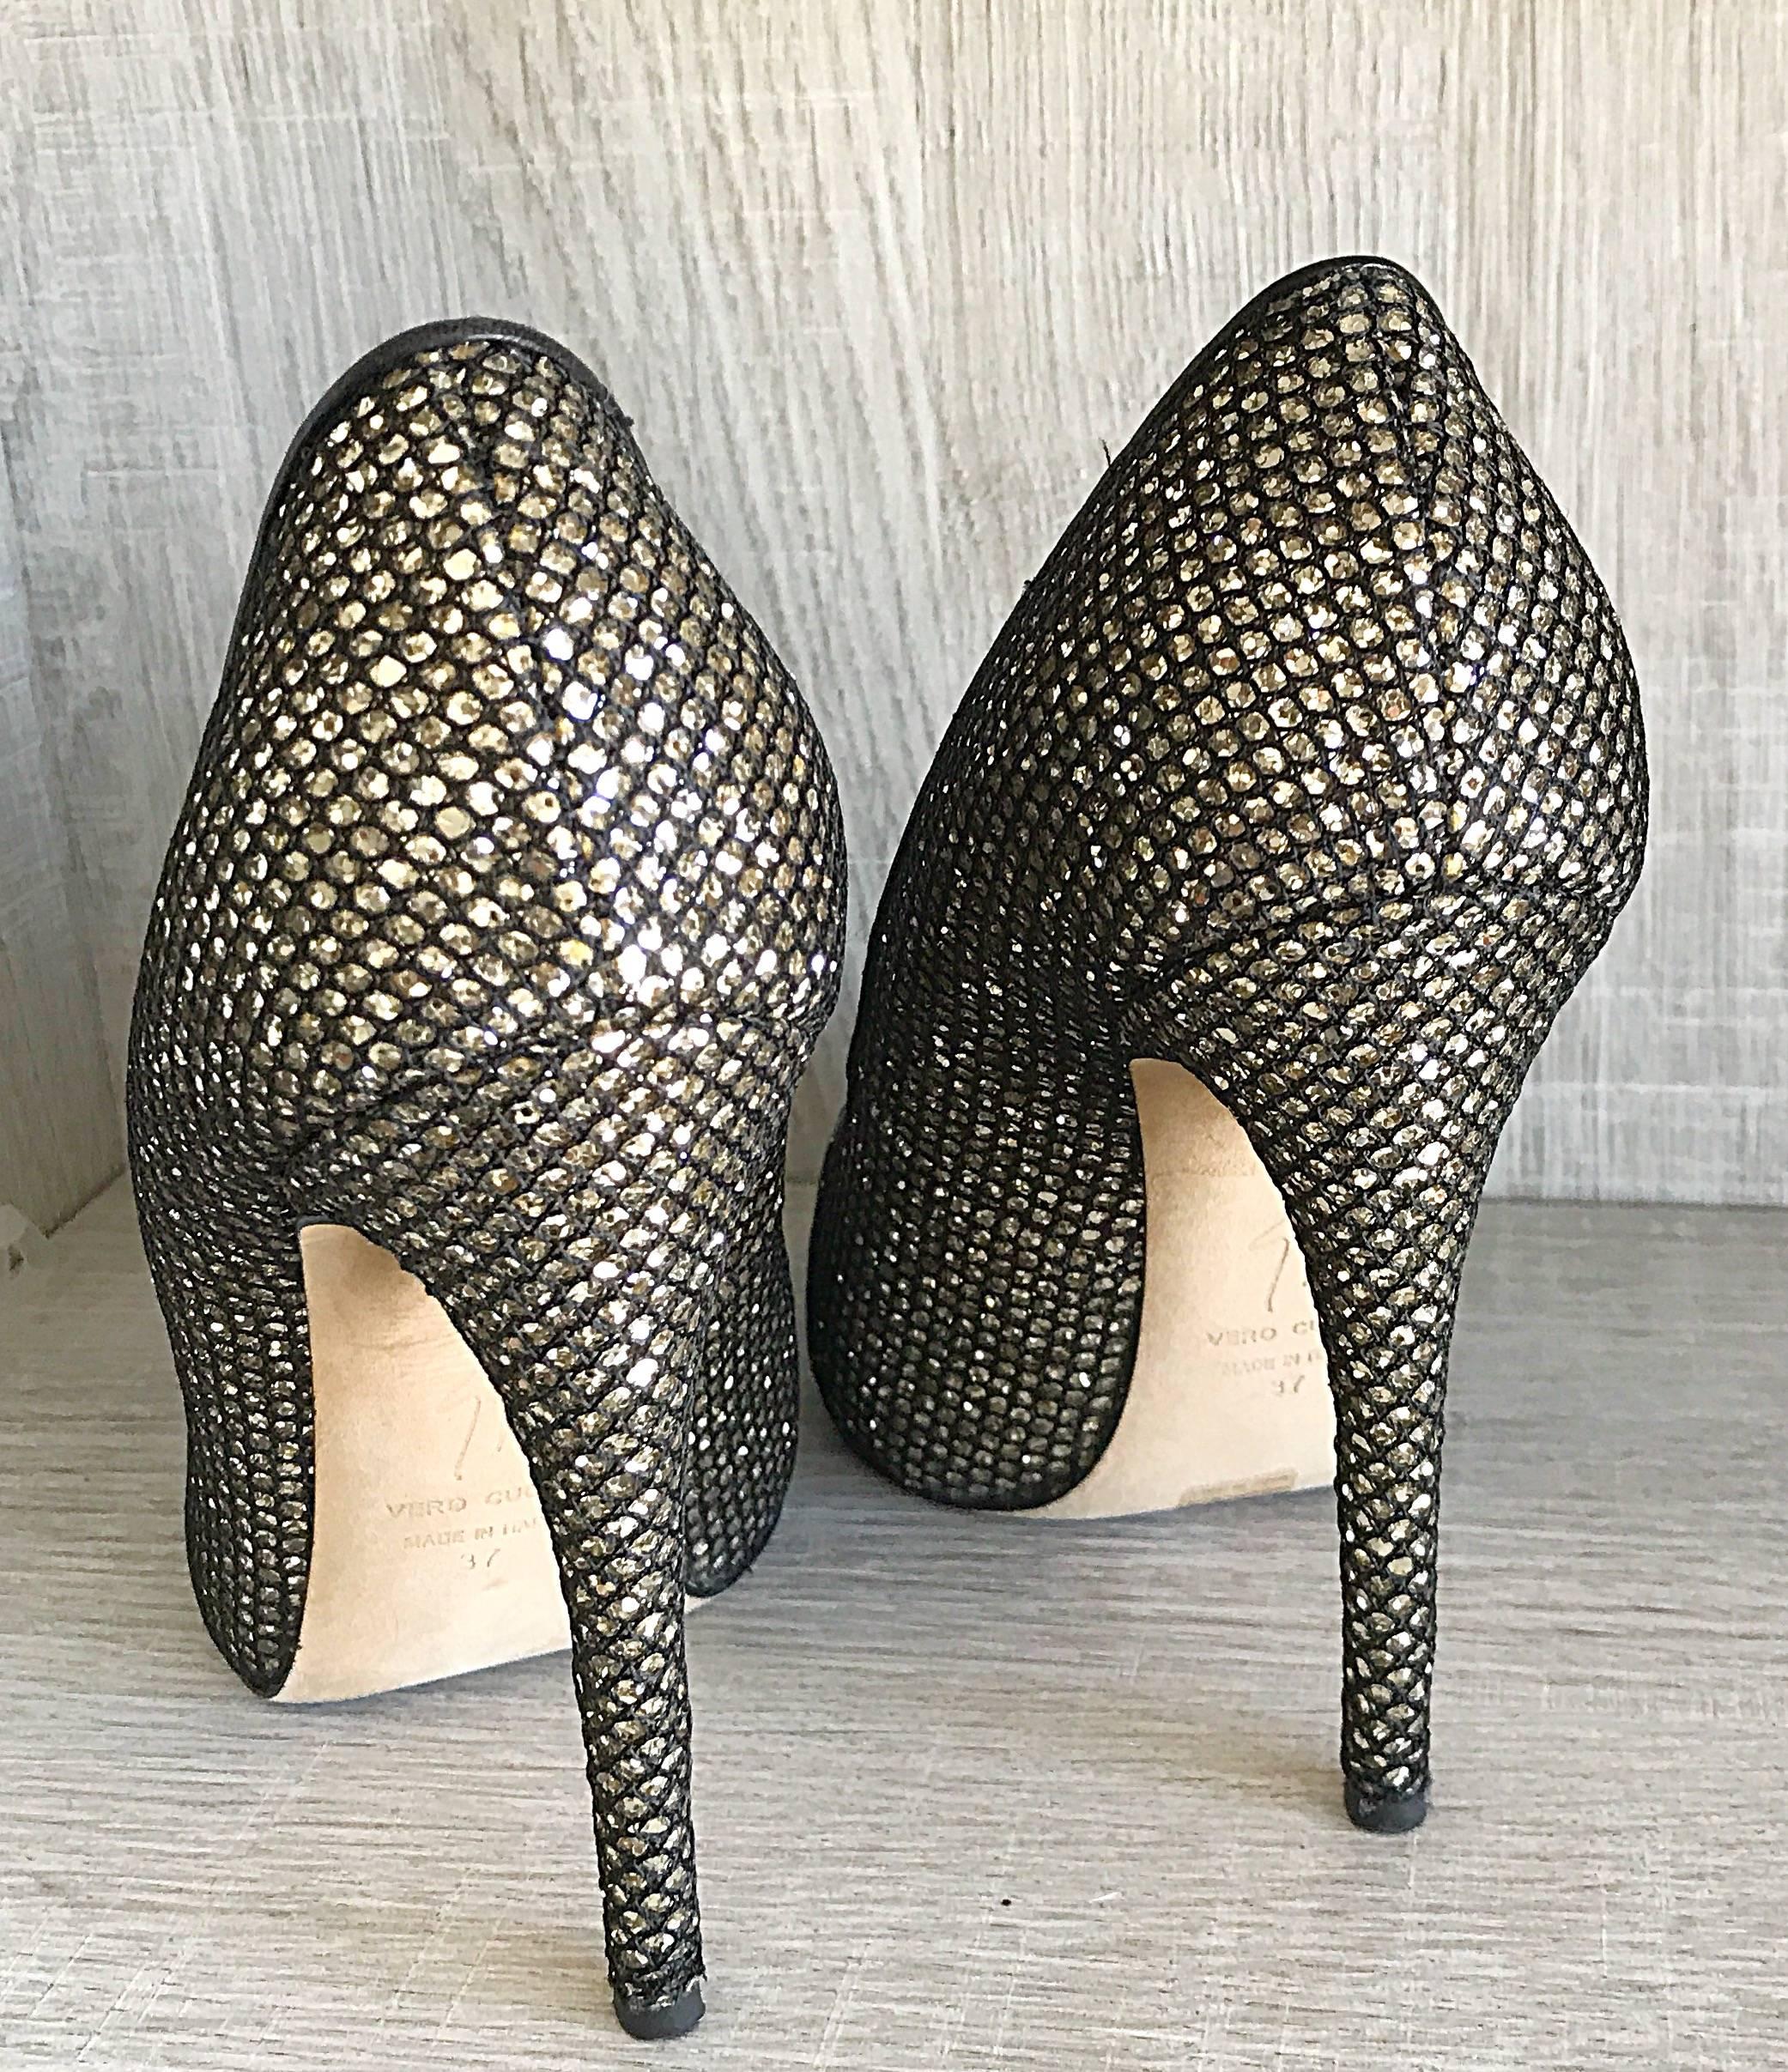 Beautiful GIUSEPPE ZANOTTI black and silver glitter peeptoe heels! Only worn once for a phot shoot, and in perfect condition. Features a hidden platform for extra comfort. A great alternative to a classic black heel. Great with jeans, a dress, or